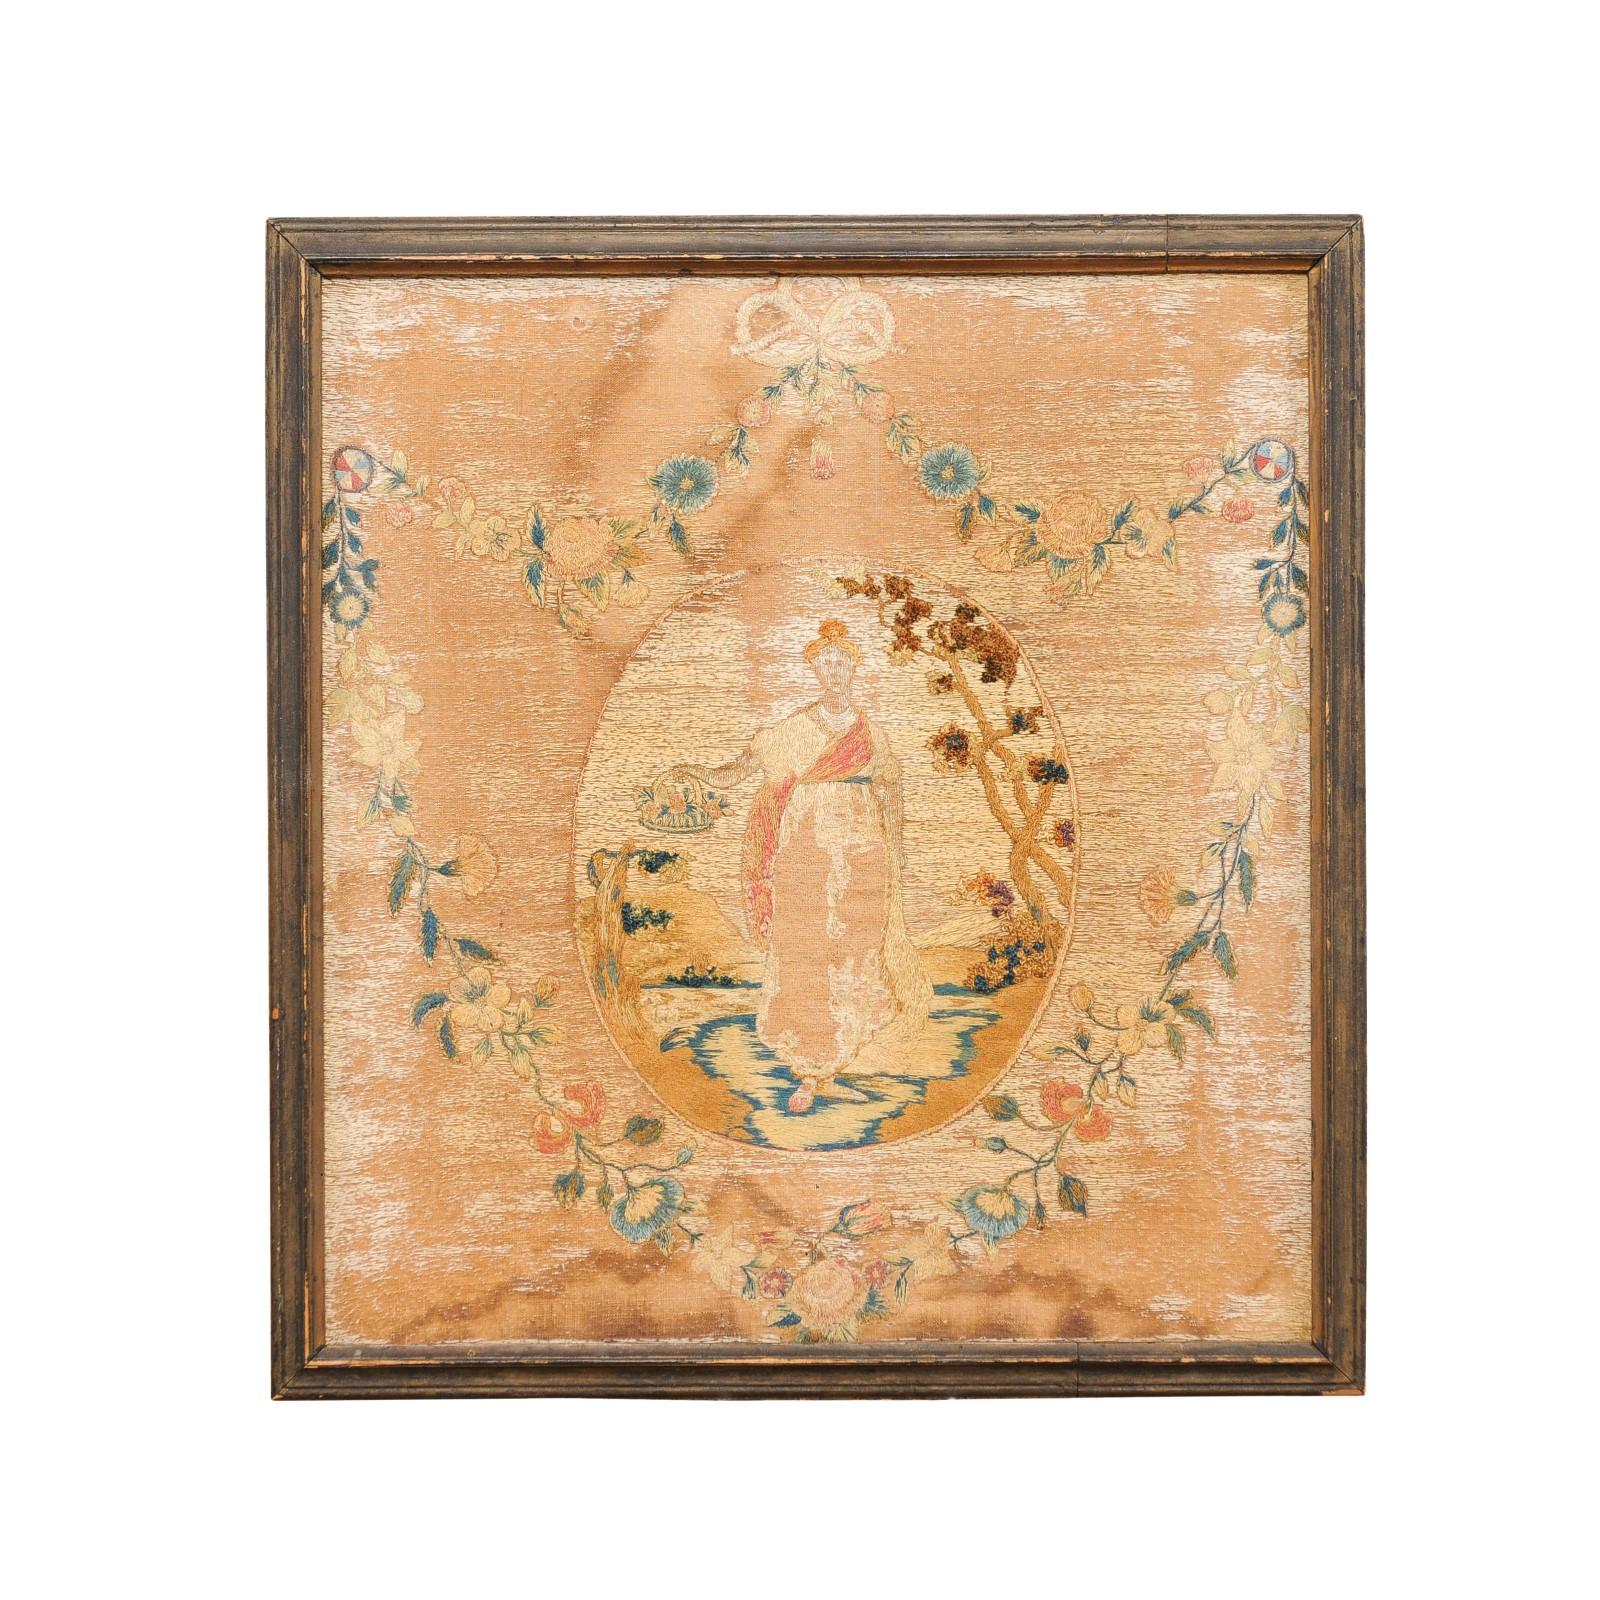  Framed 19th Century English Textile In Good Condition For Sale In Atlanta, GA